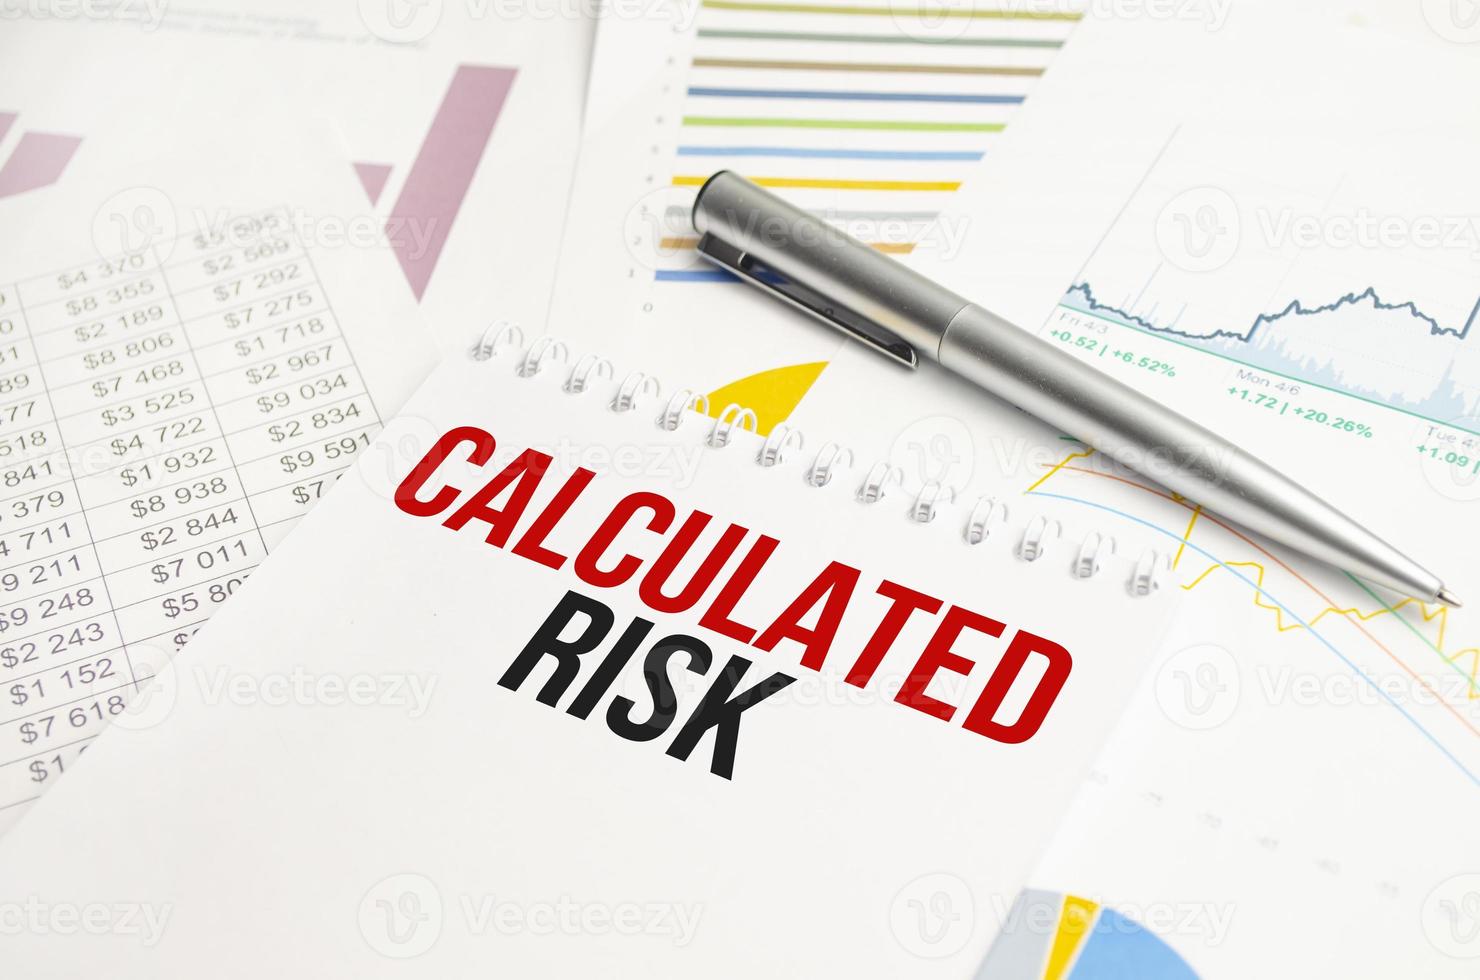 Business concept. Notebook with text Calculated risk sheet of white paper for notes, calculator, pen, in the white background photo